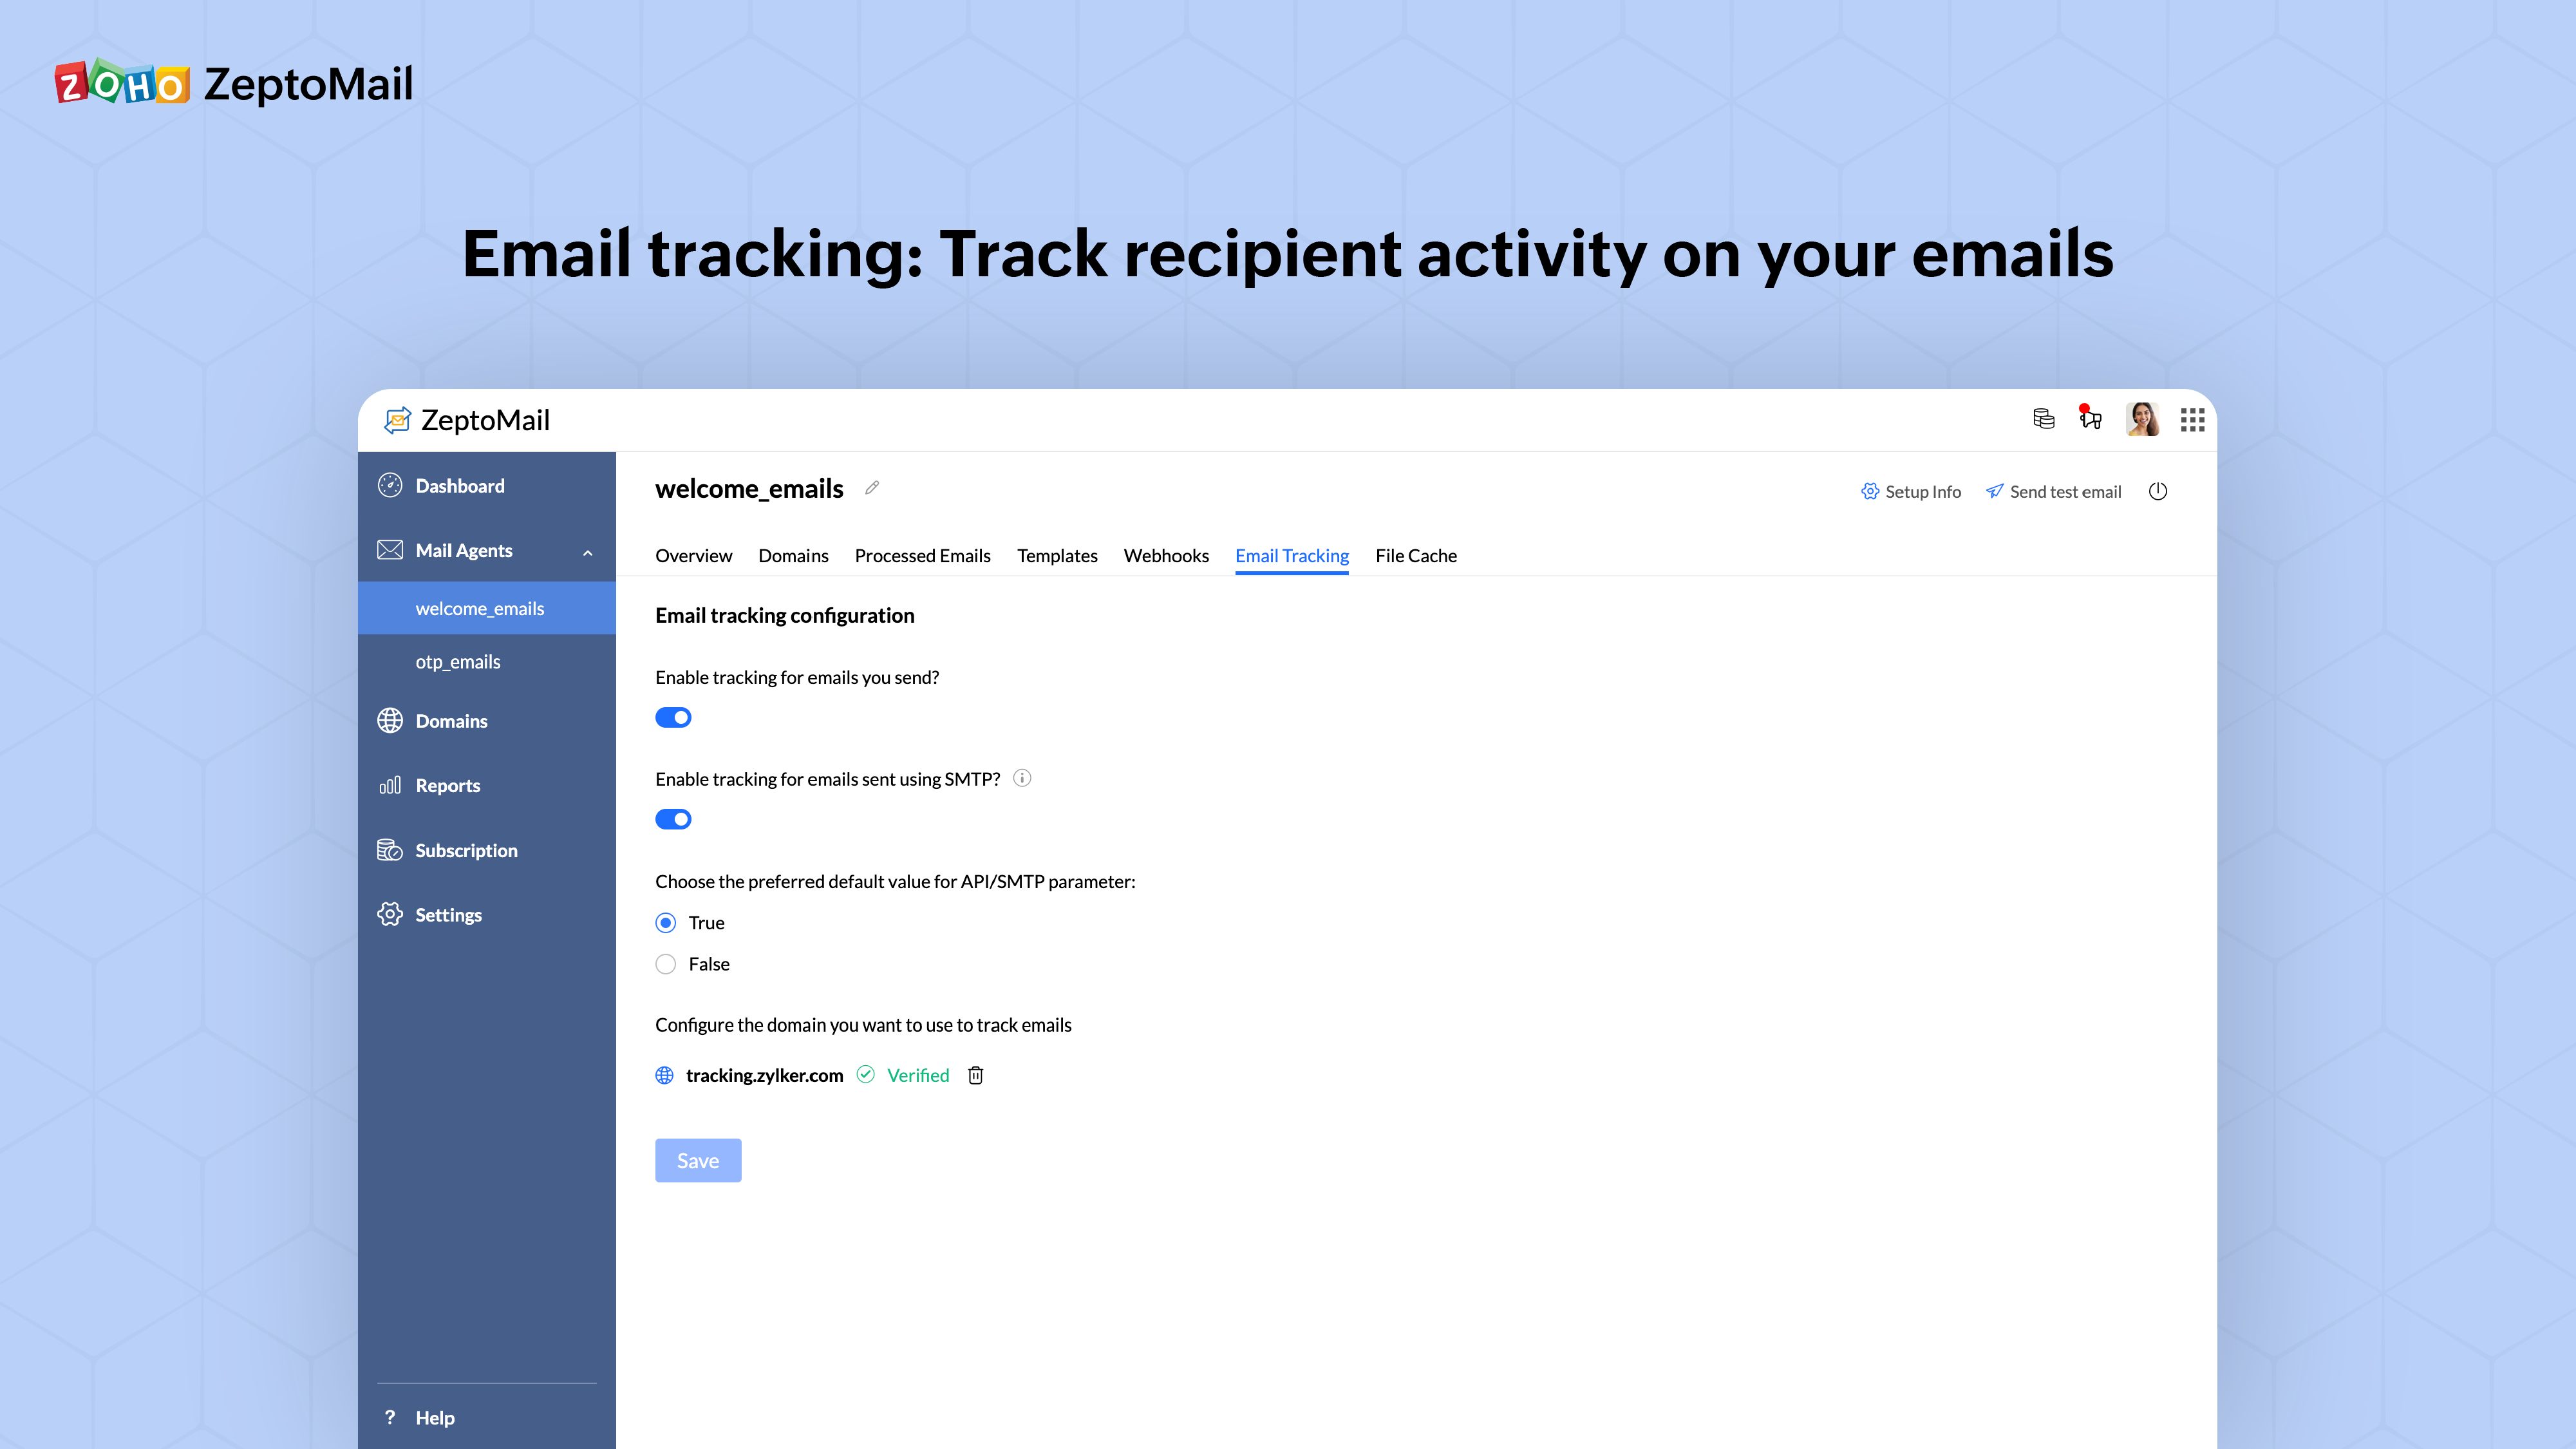 Zeptomail Email tracking: Track recipient activity on your emails